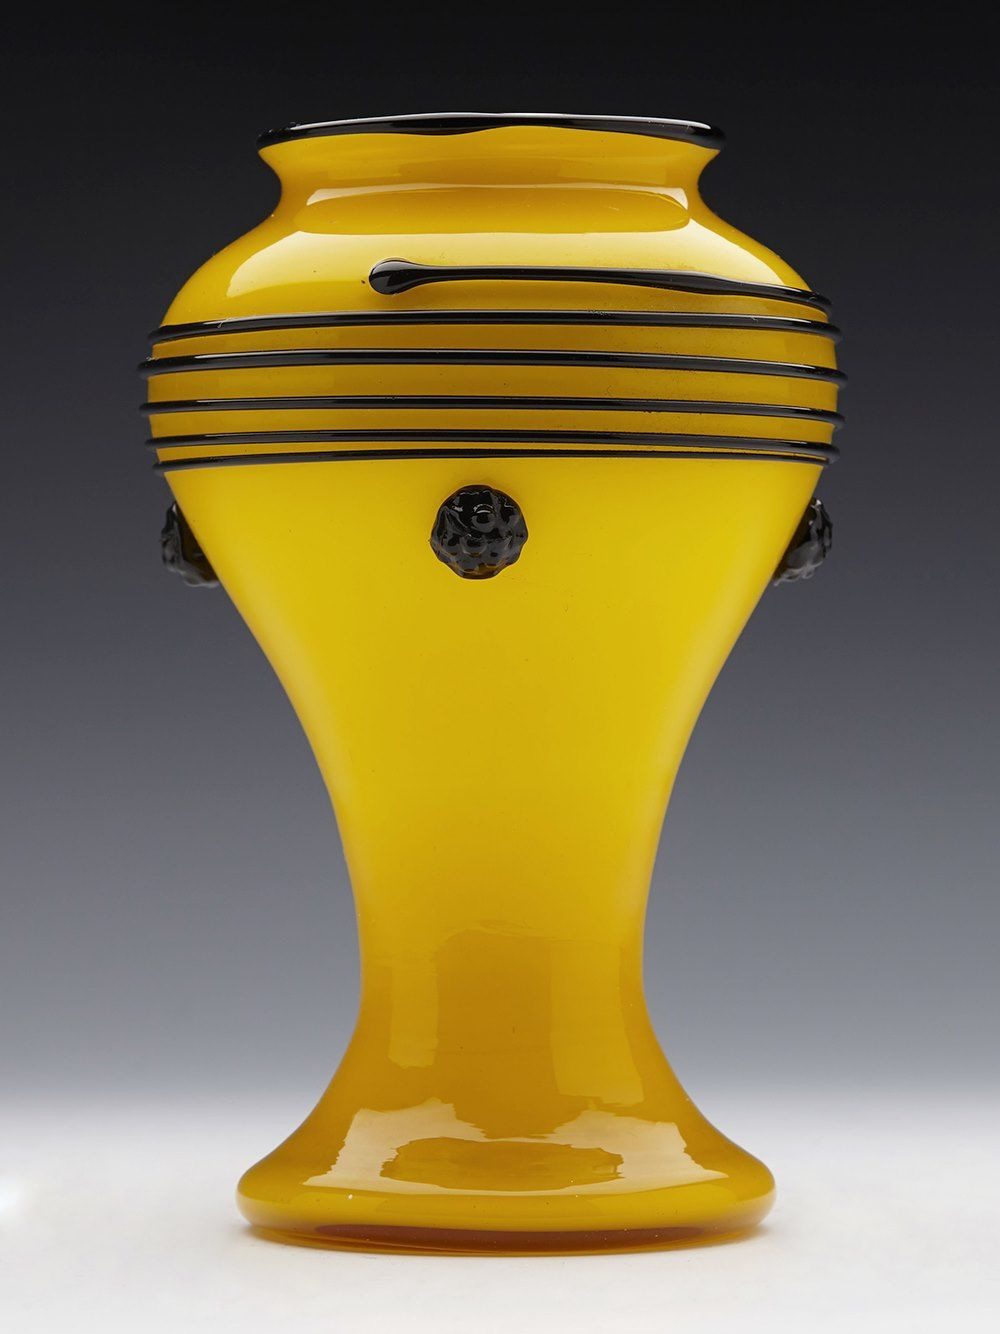 23 Fashionable Yellow Vases and Bowls 2024 free download yellow vases and bowls of stunning loetz yellow tango art glass vase designed by michael regarding stunning loetz yellow tango art glass vase designed by michael powolny c 1916